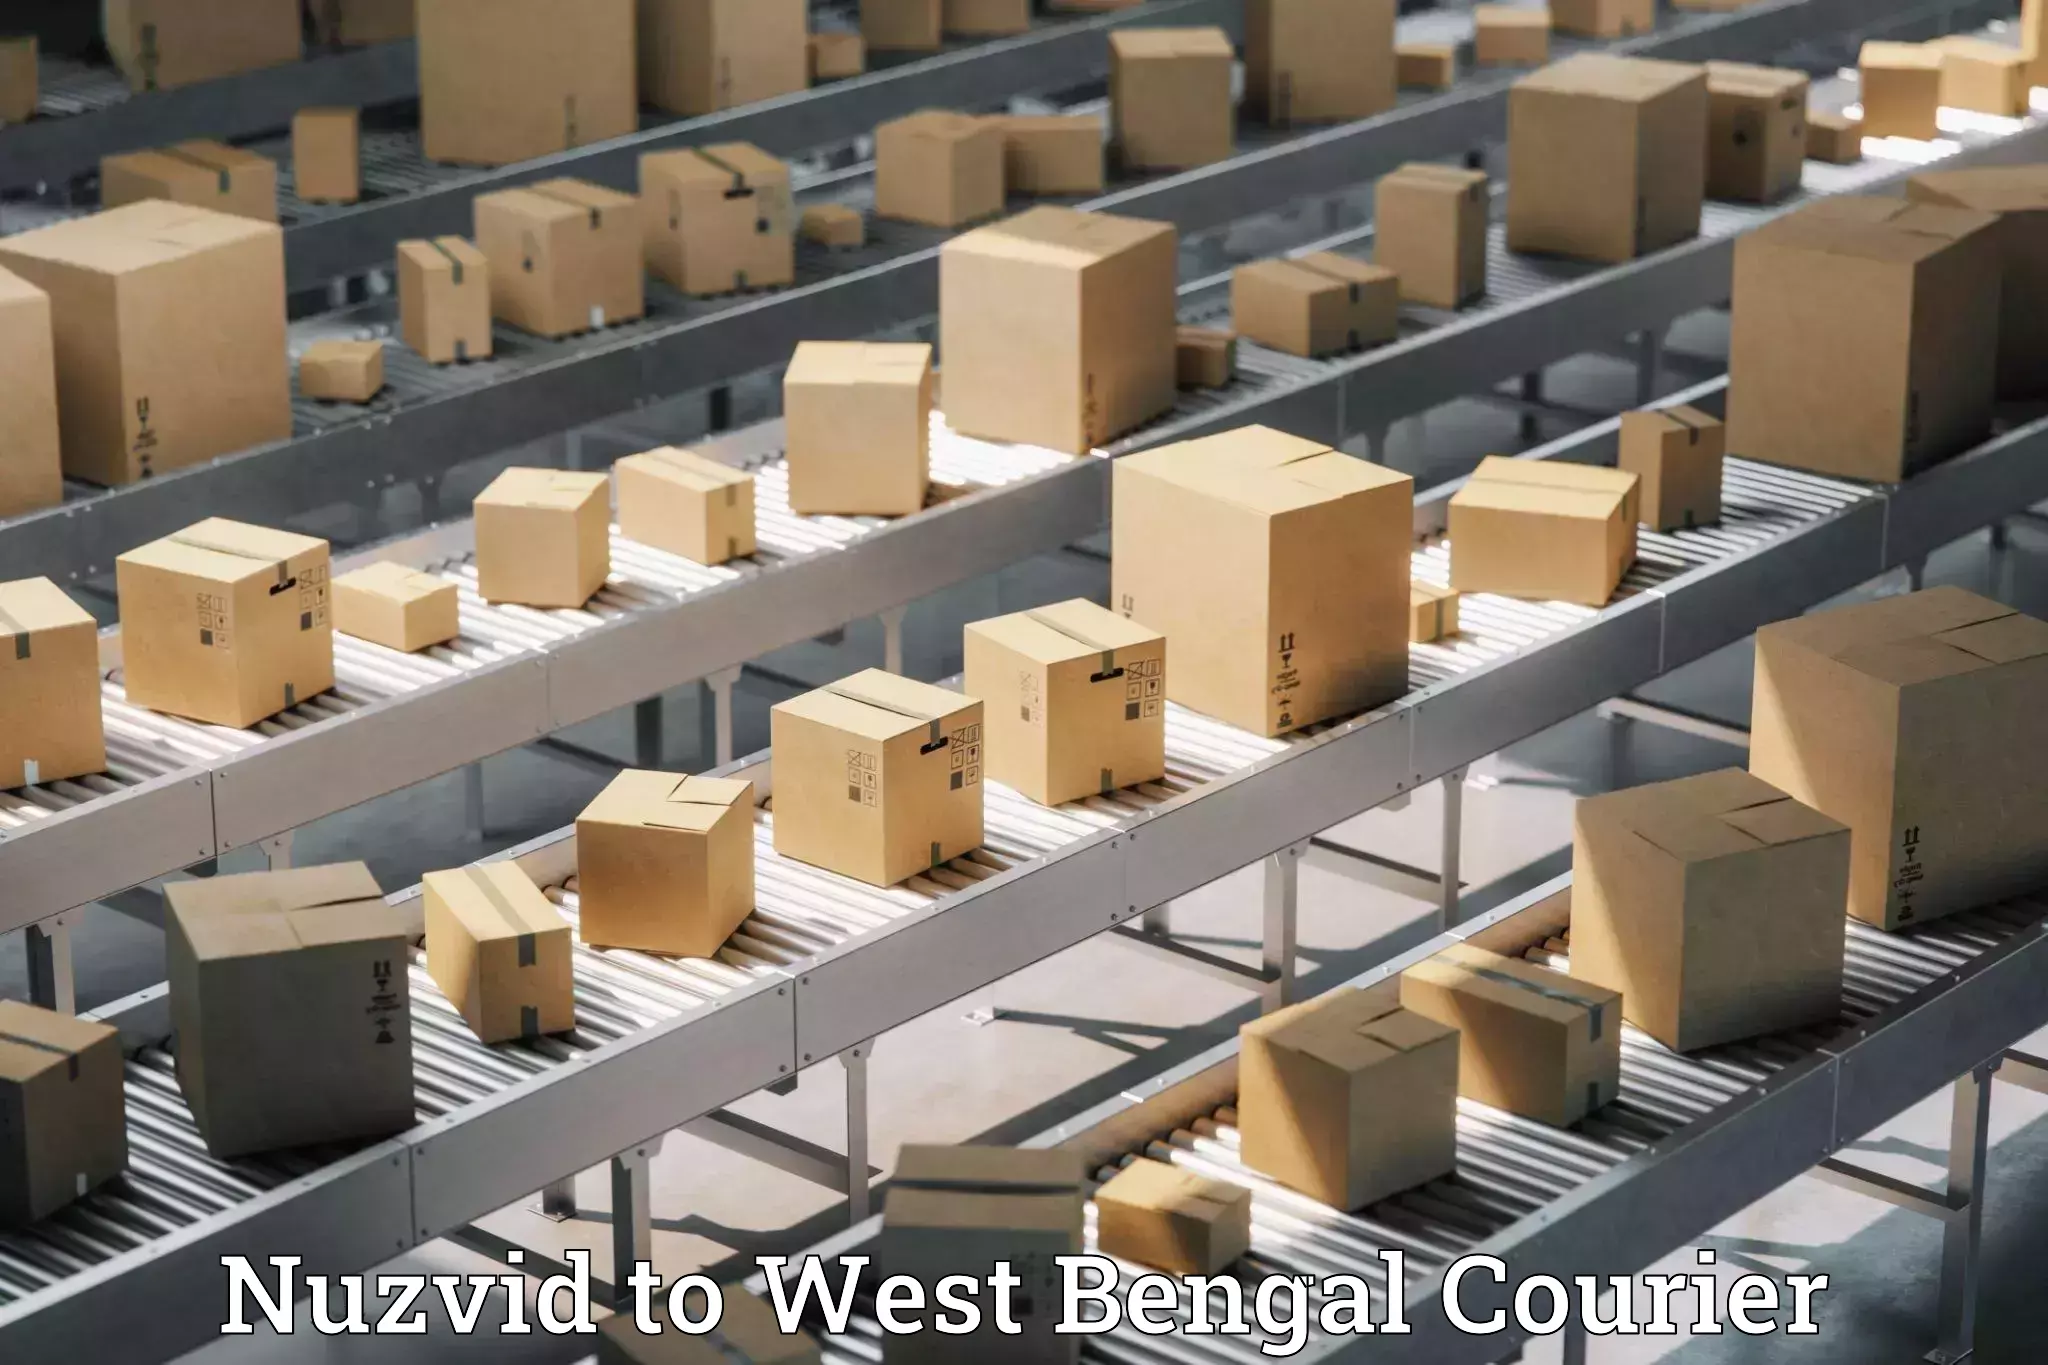 Advanced courier platforms Nuzvid to West Bengal